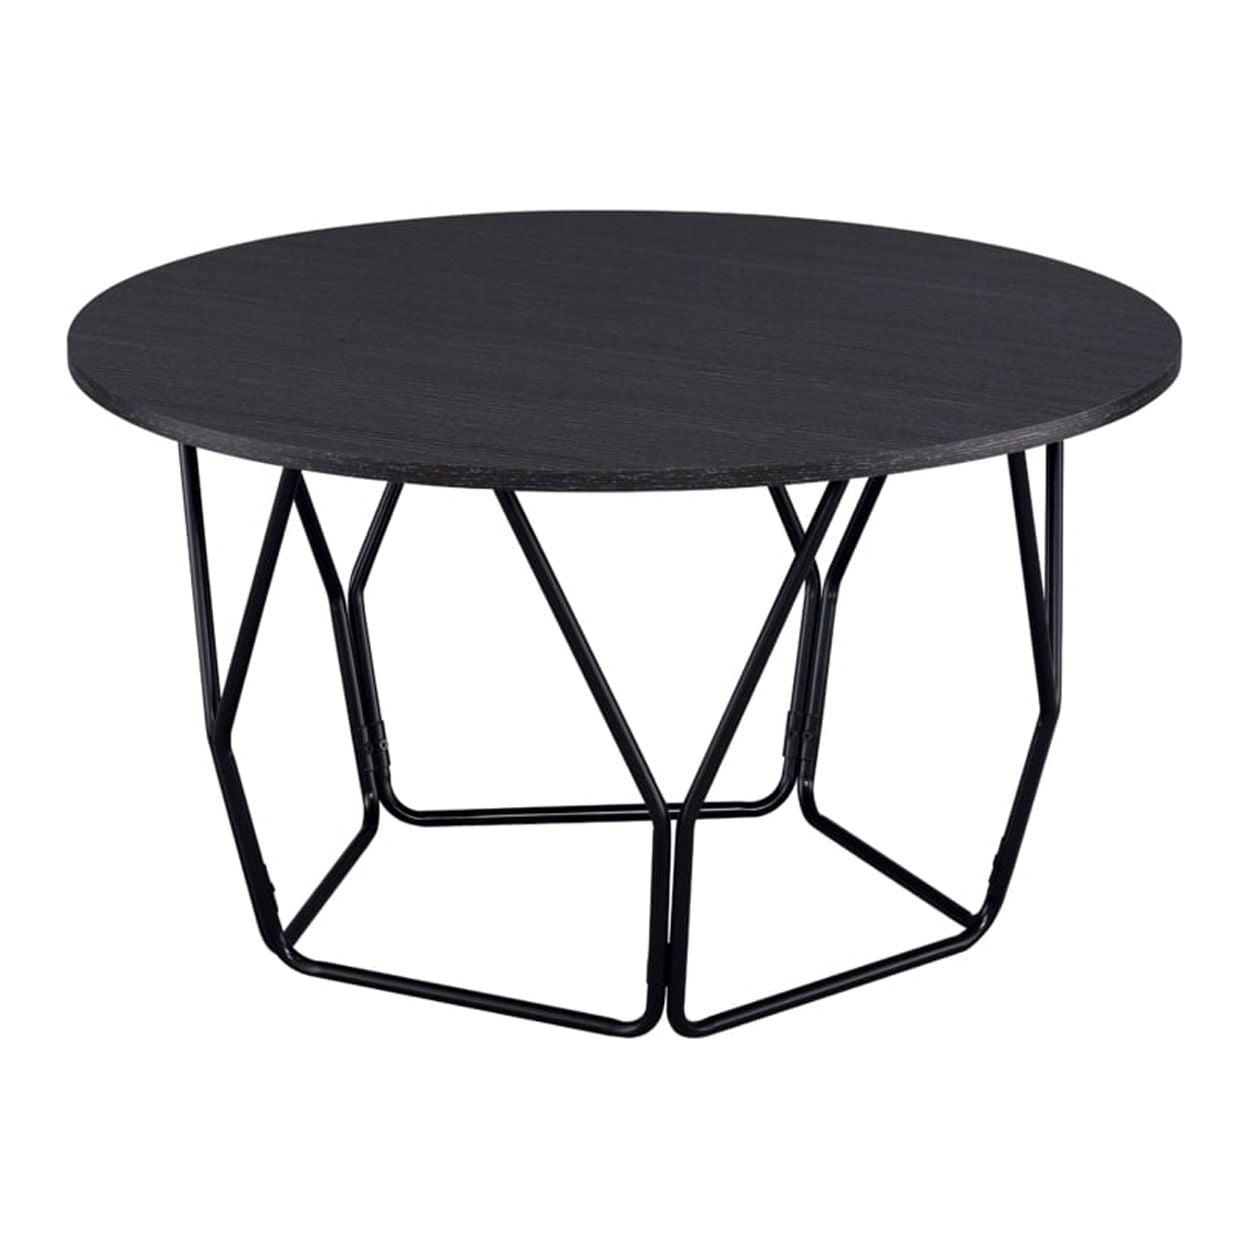 32" Industrial Round Wooden Coffee Table with Geometric Black Metal Base